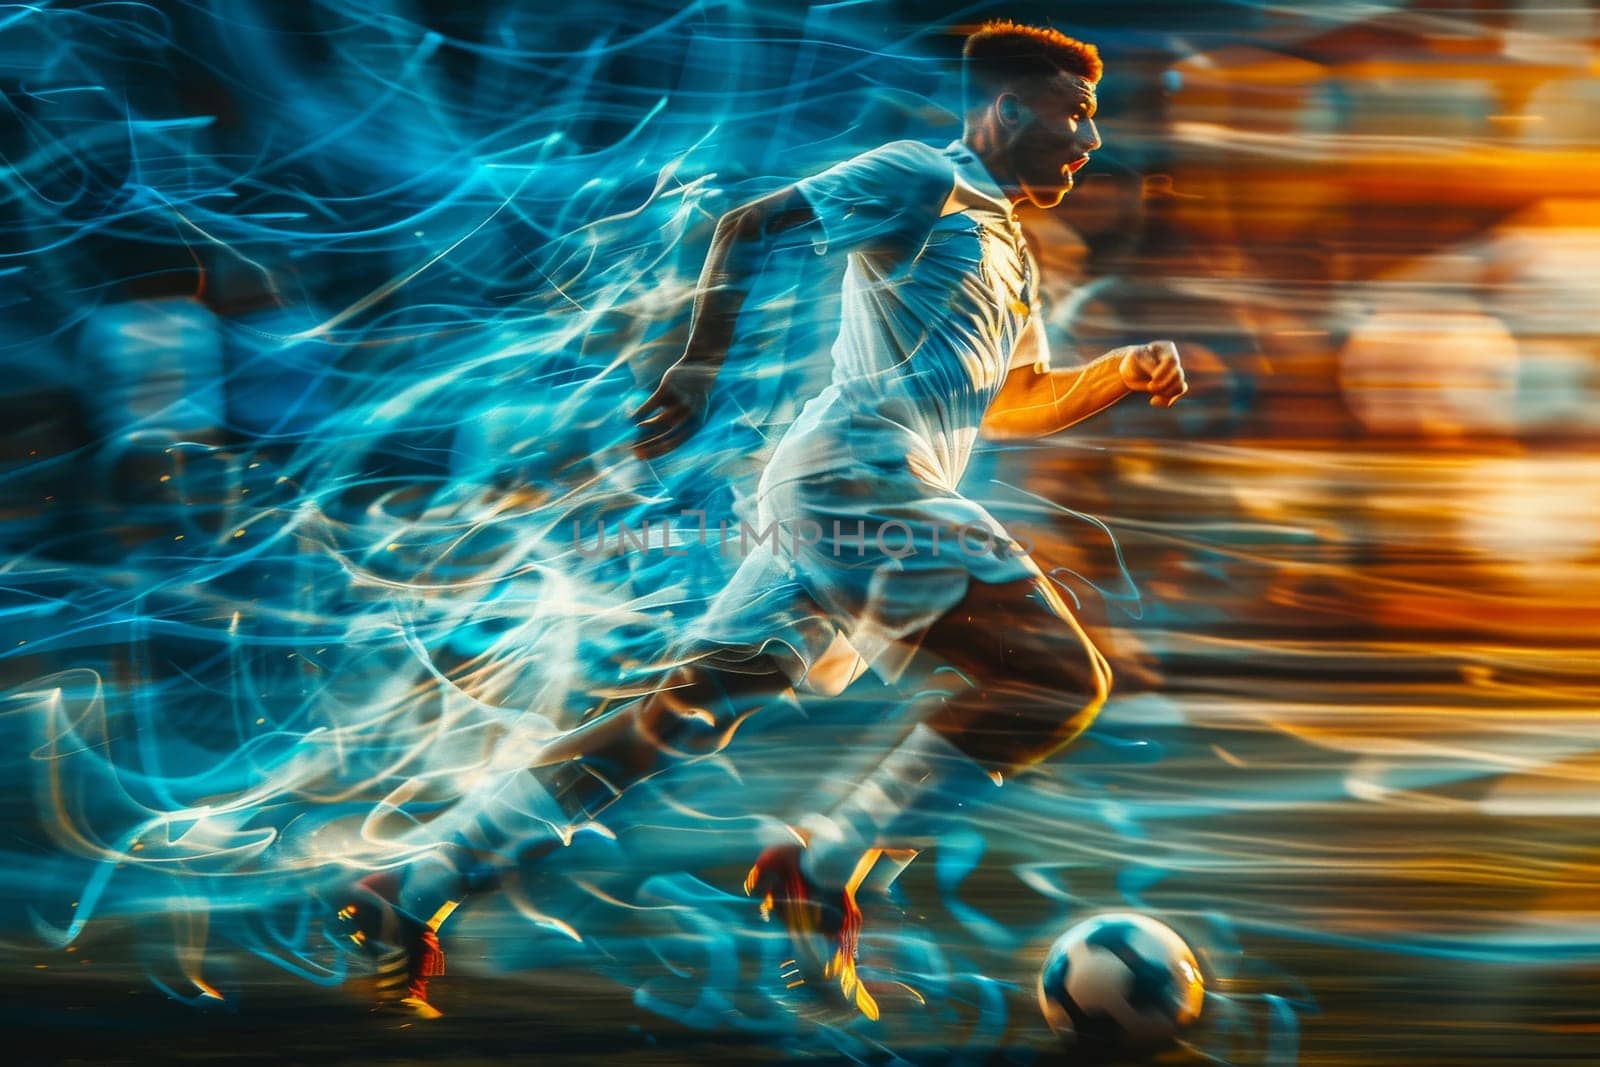 A soccer player is kicking a ball on a field with a blue and orange background. Concept of energy and excitement, as the player is in motion